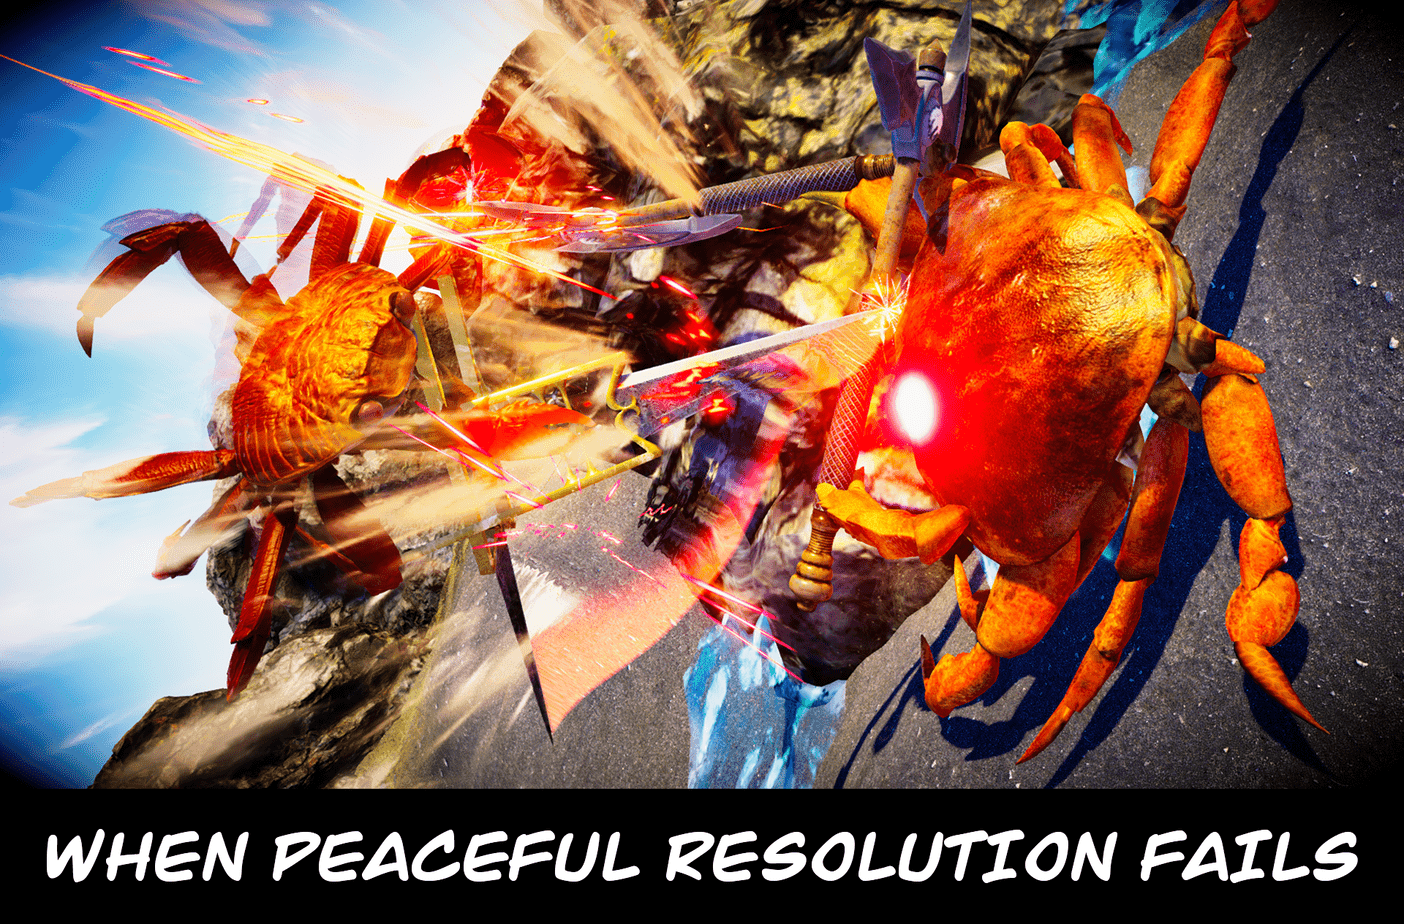 Two crabs battling with "When peaceful resolution fails" text.